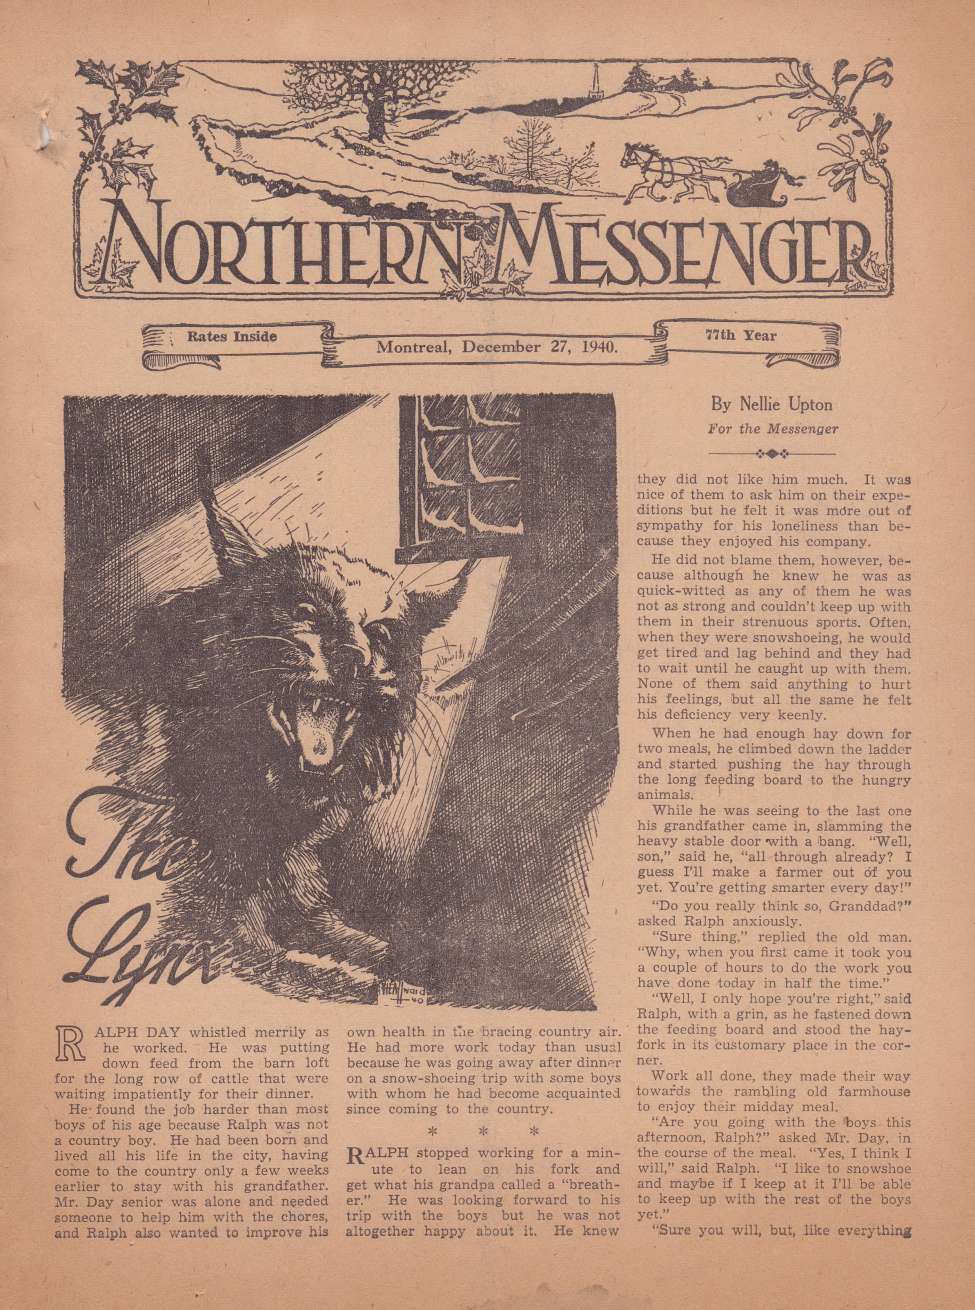 Comic Book Cover For Northern Messenger (1940-12-27)